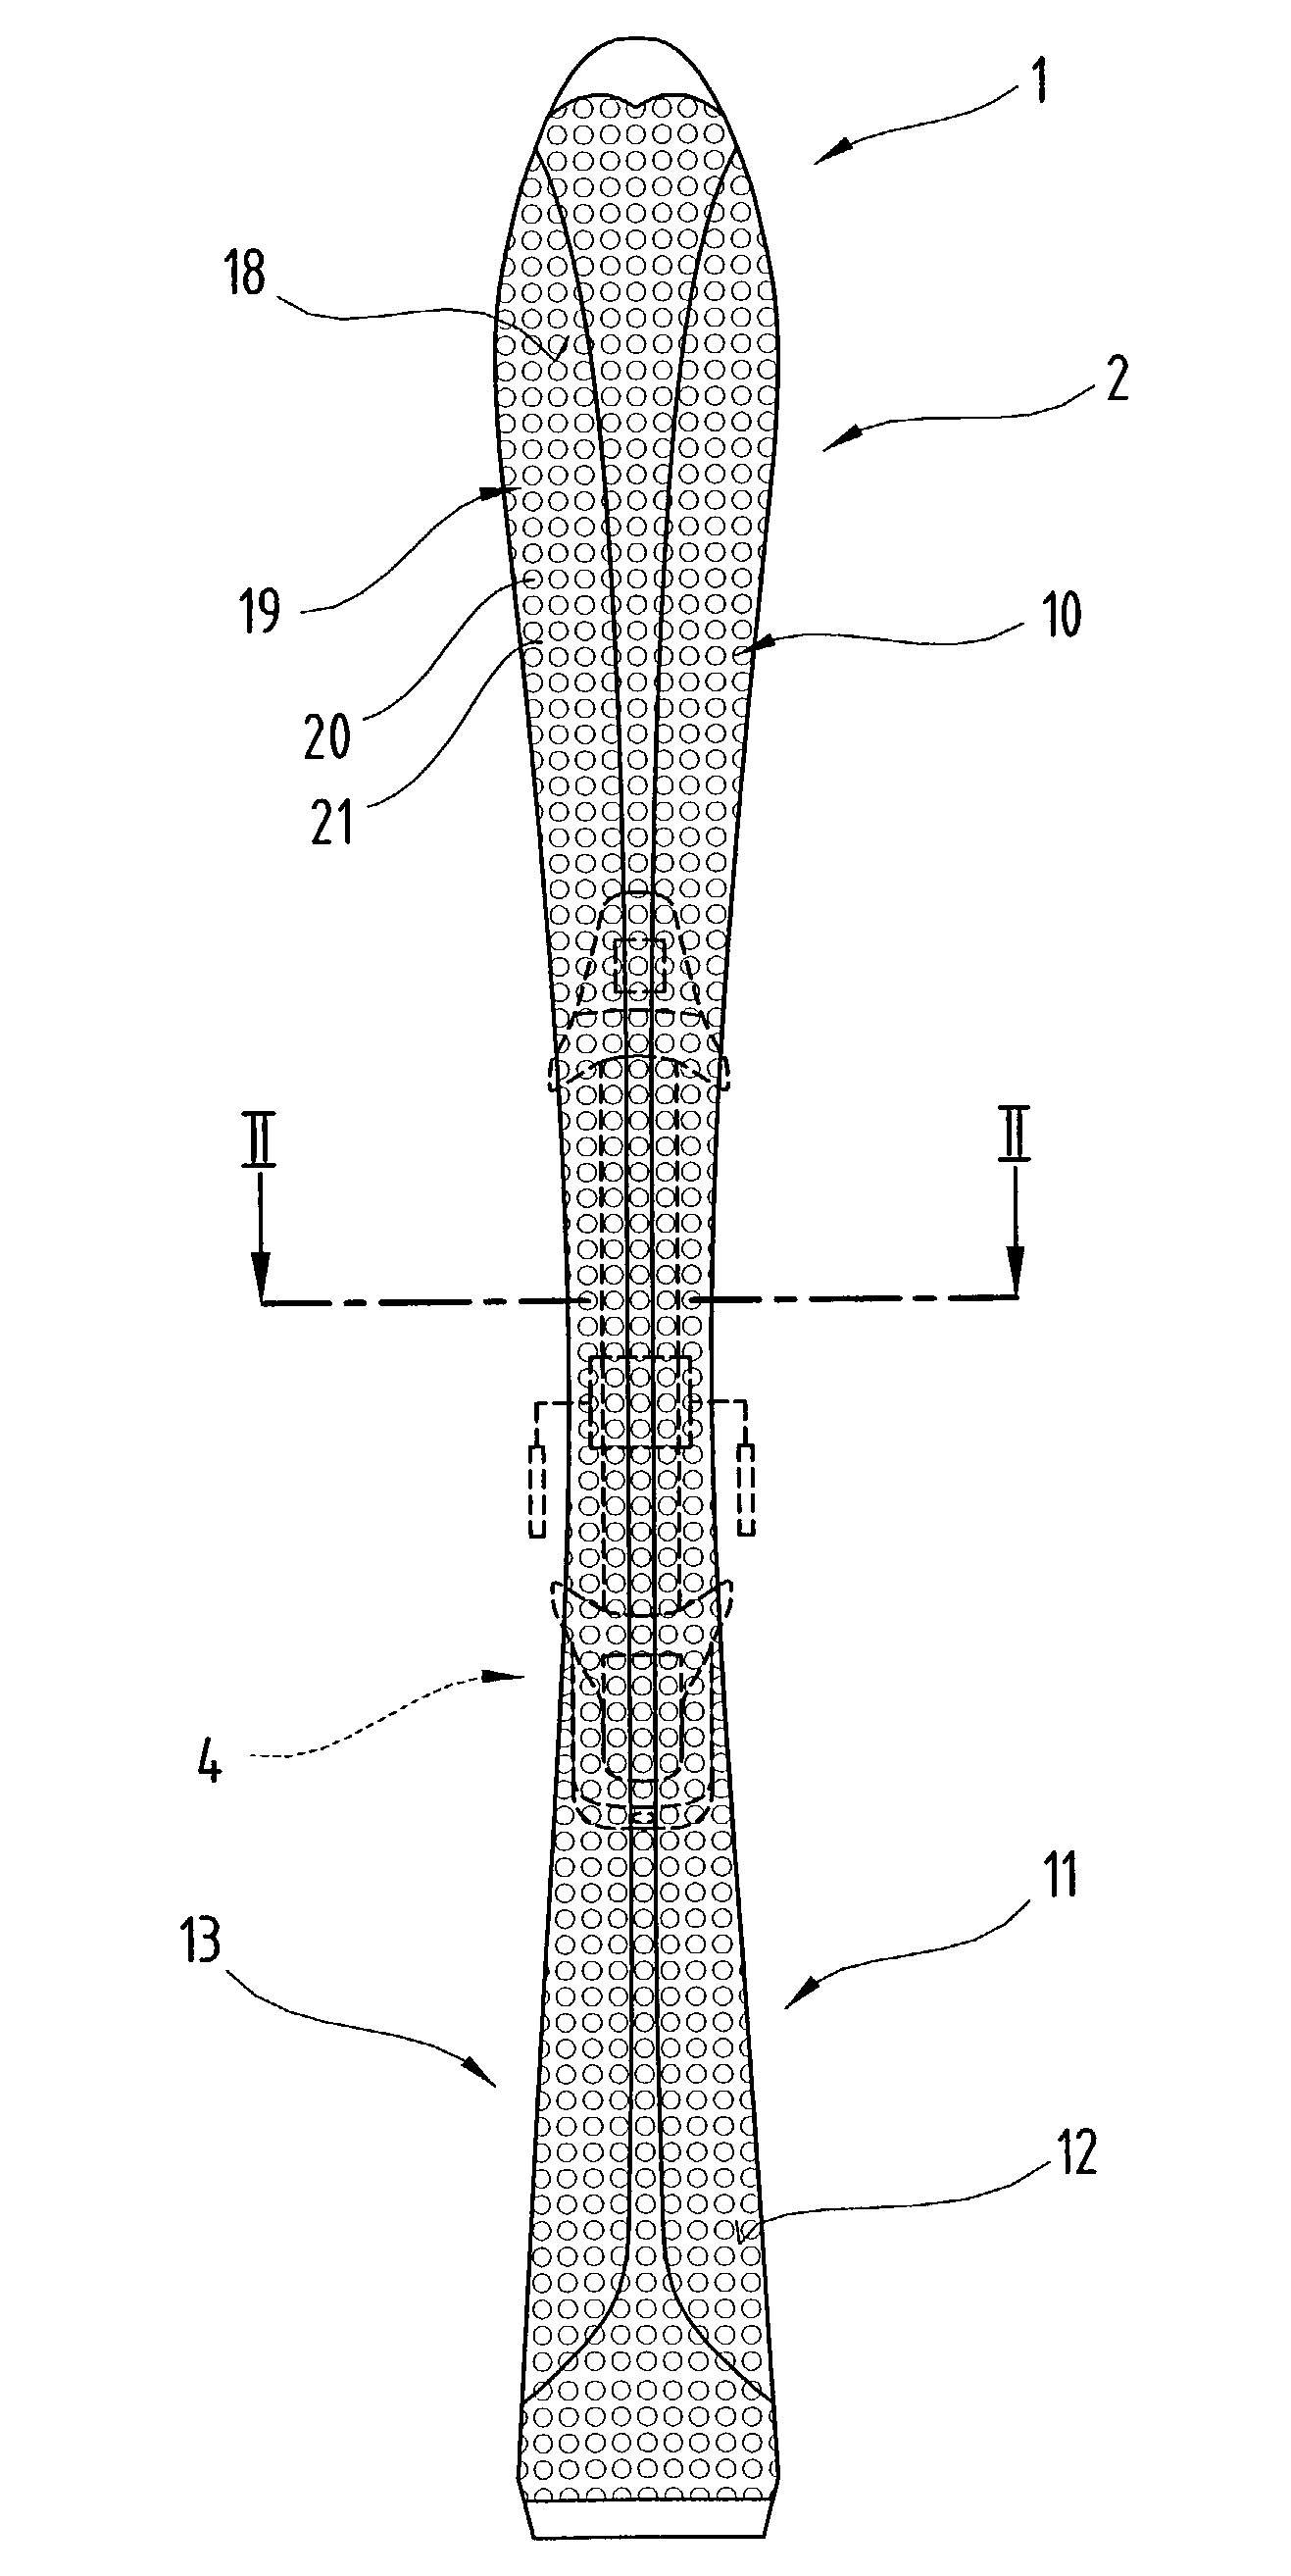 Board-type runner device and top layer and running surface lining for same